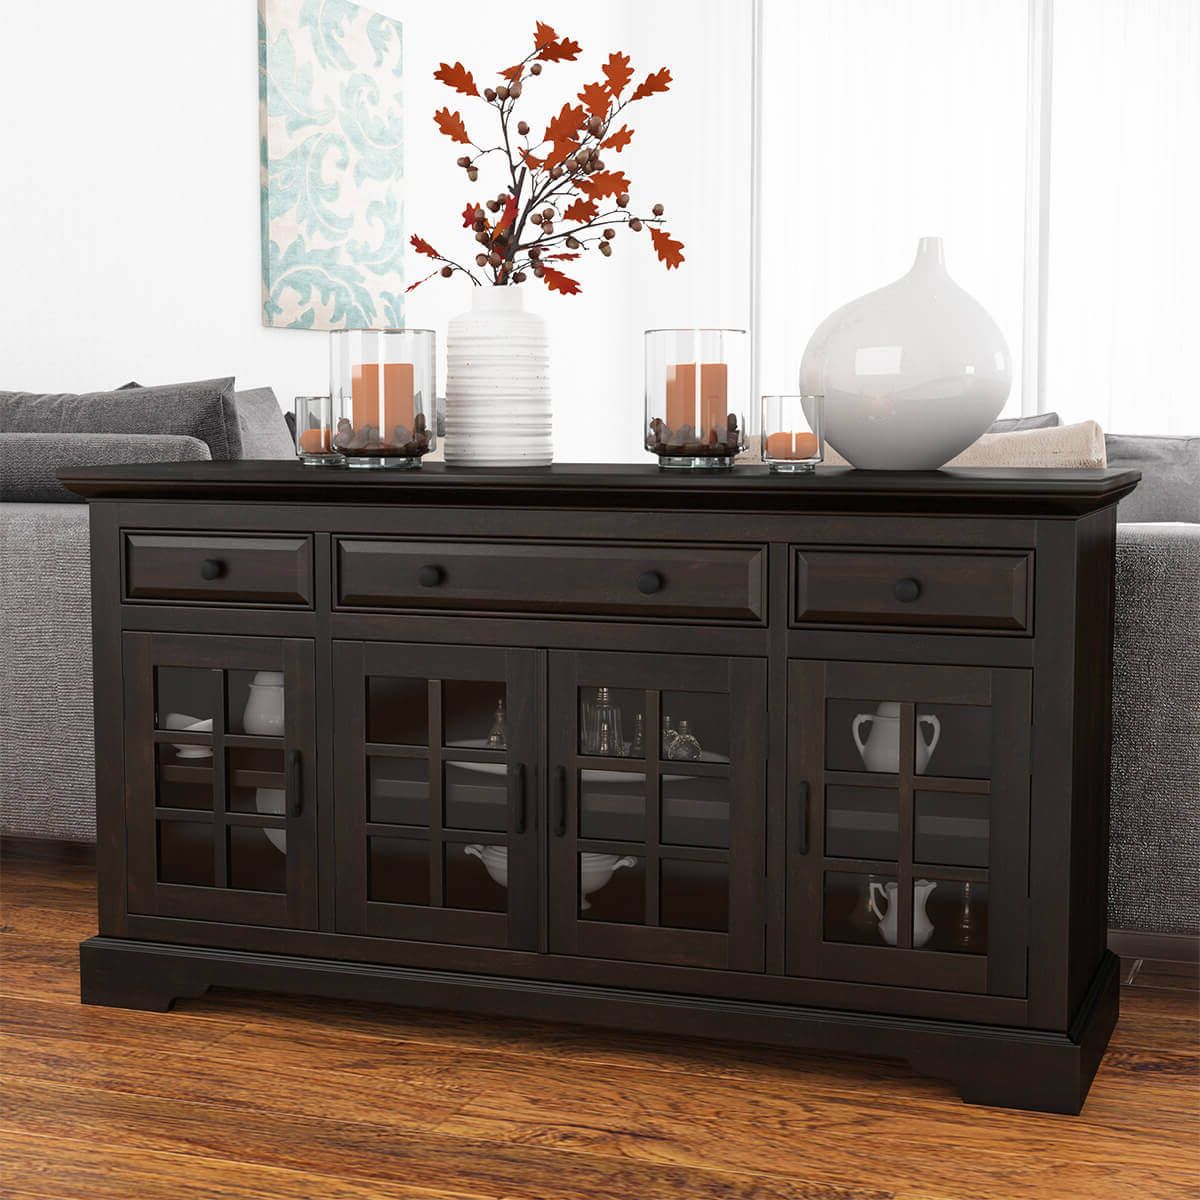 Well Liked Sideboard Storage Cabinet With 3 Drawers & 3 Doors Pertaining To Tirana Rustic Solid Wood Glass Door 3 Drawer Large Sideboard Cabinet (View 11 of 15)